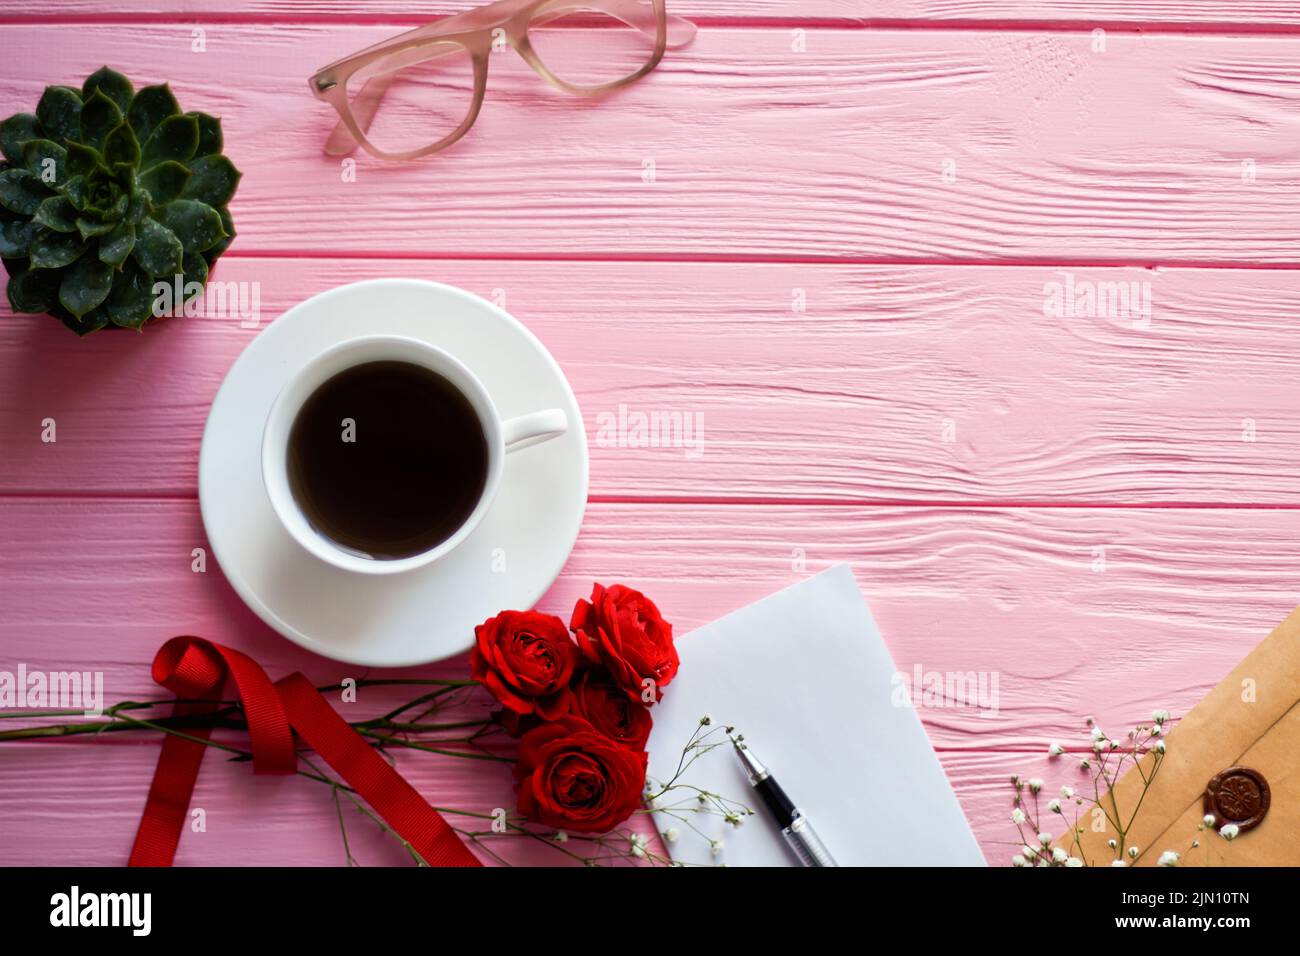 Top view coffee cup with glasses and copy space. Pink wooden desk background. Stock Photo